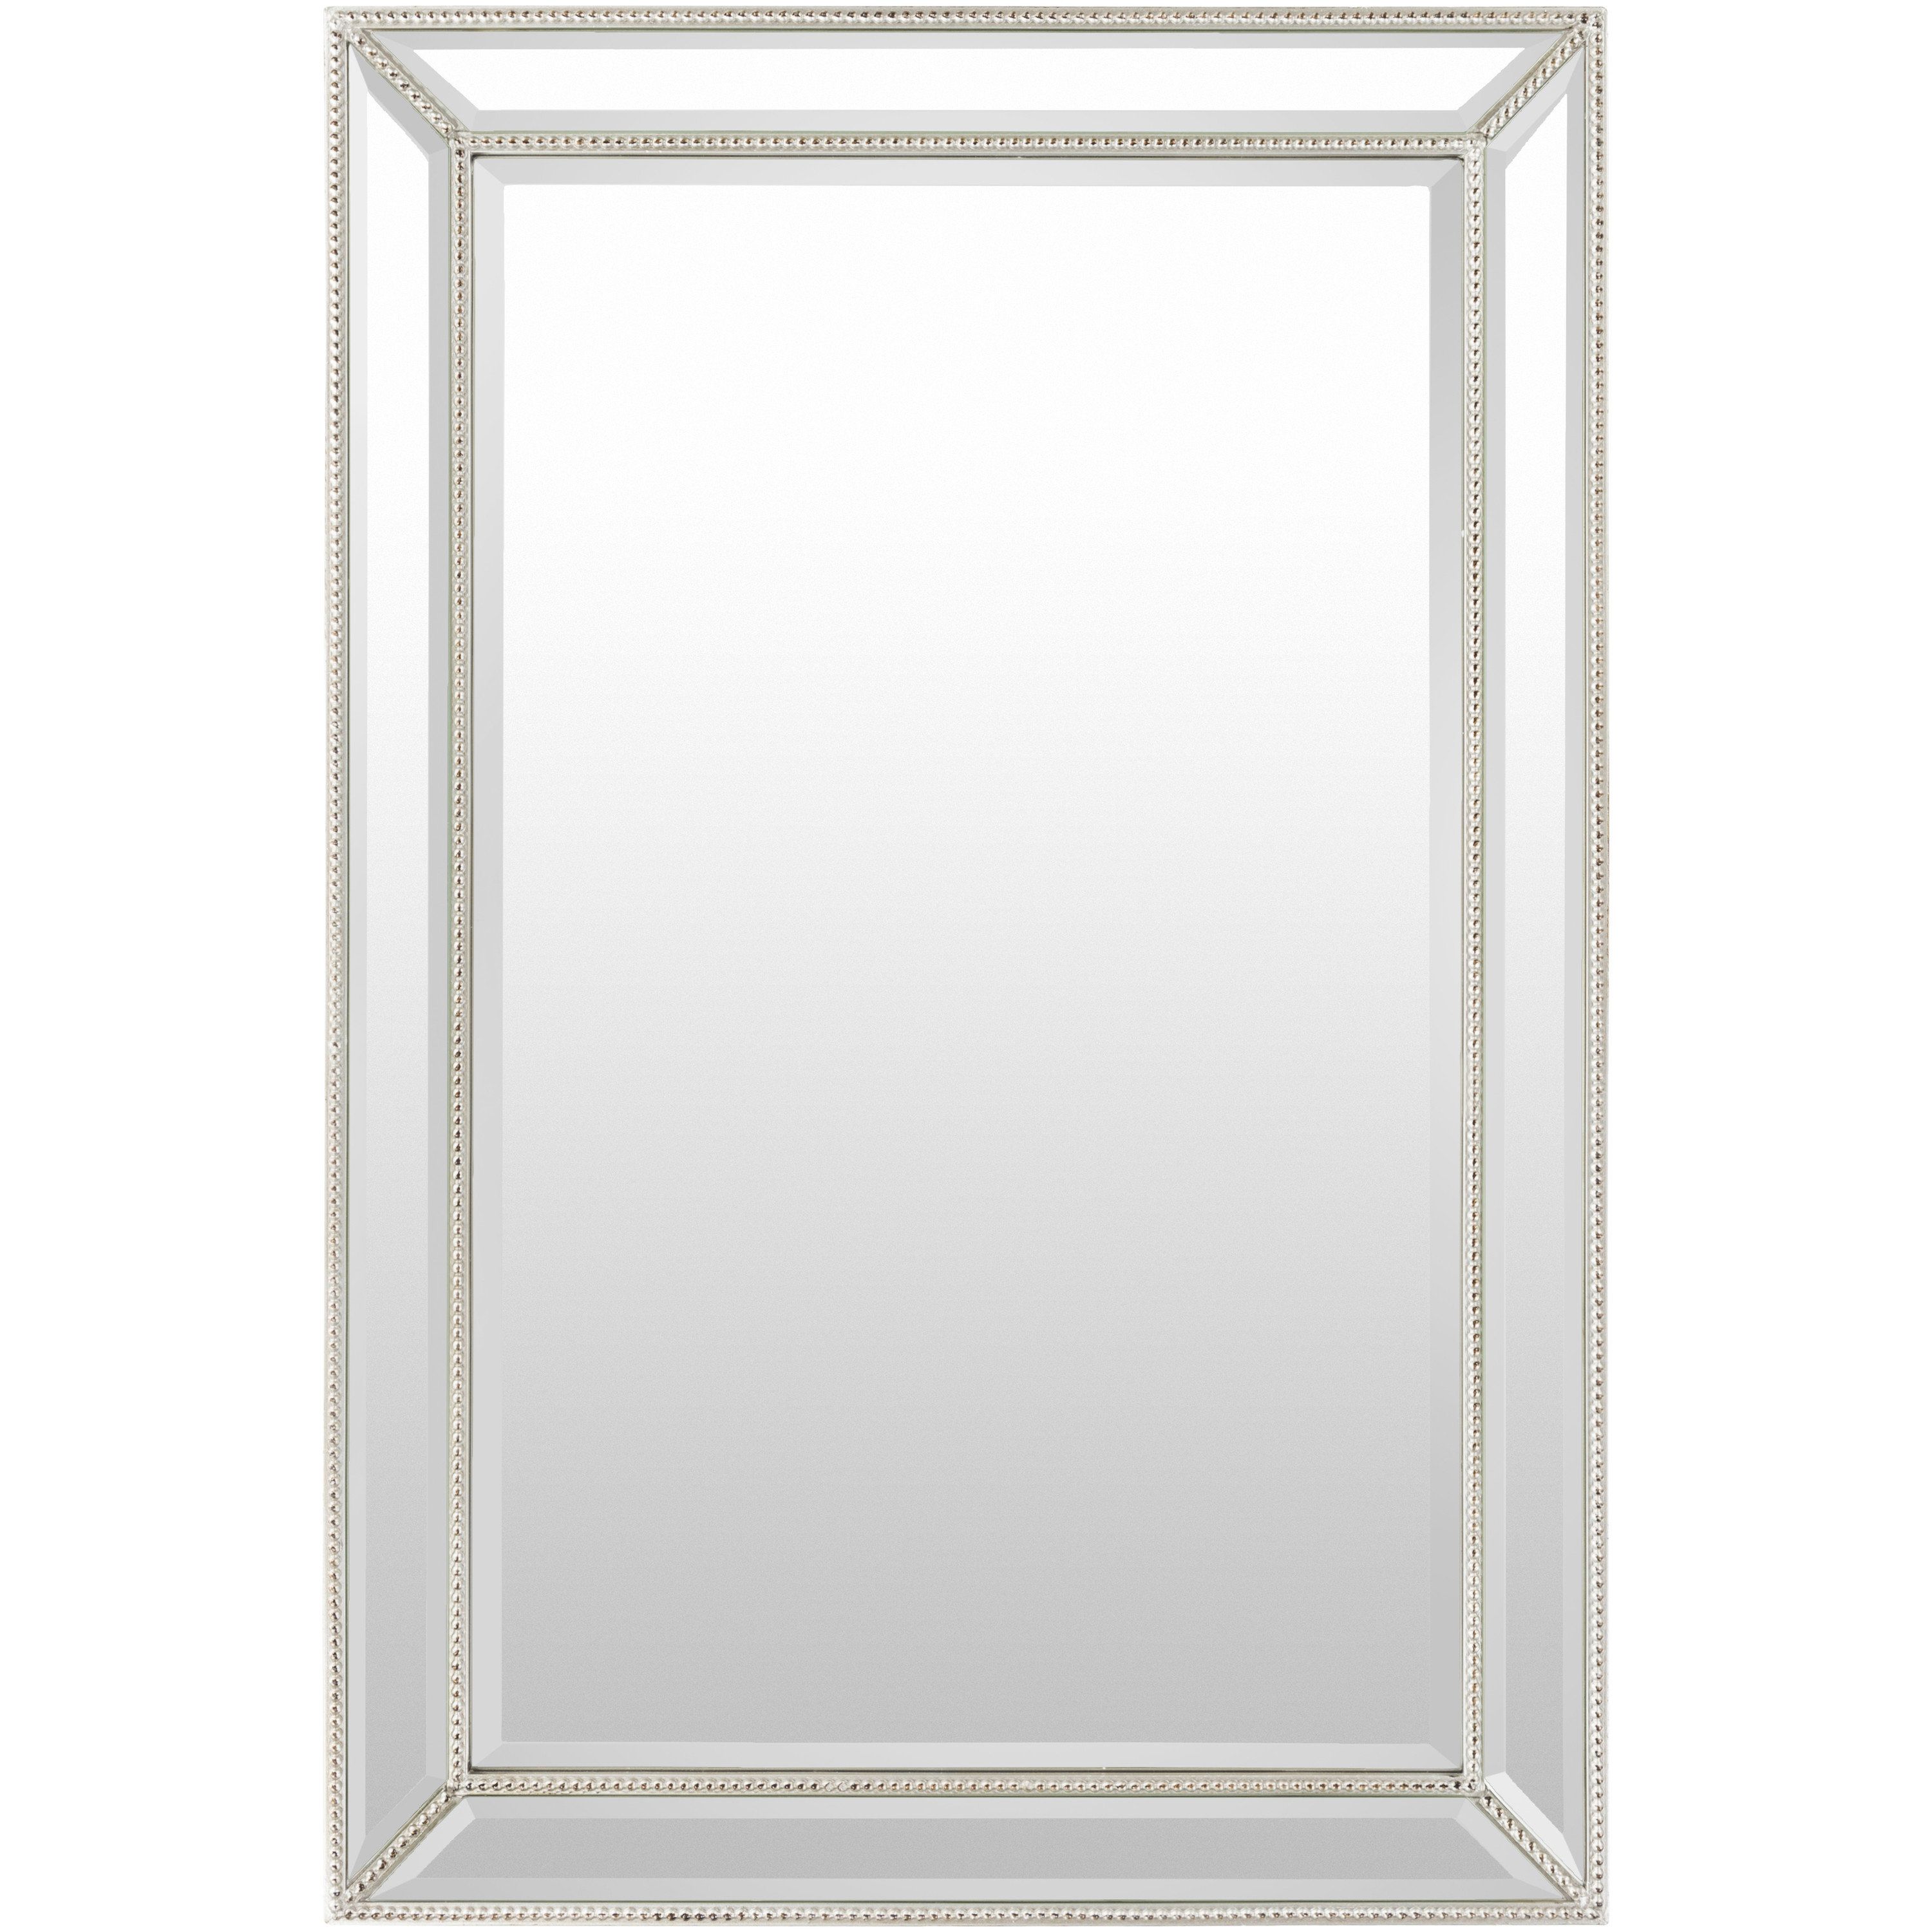 2020 Tutuala Traditional Beveled Accent Mirrors Regarding Darby Home Co Tutuala Traditional Beveled Accent Mirror (View 3 of 20)